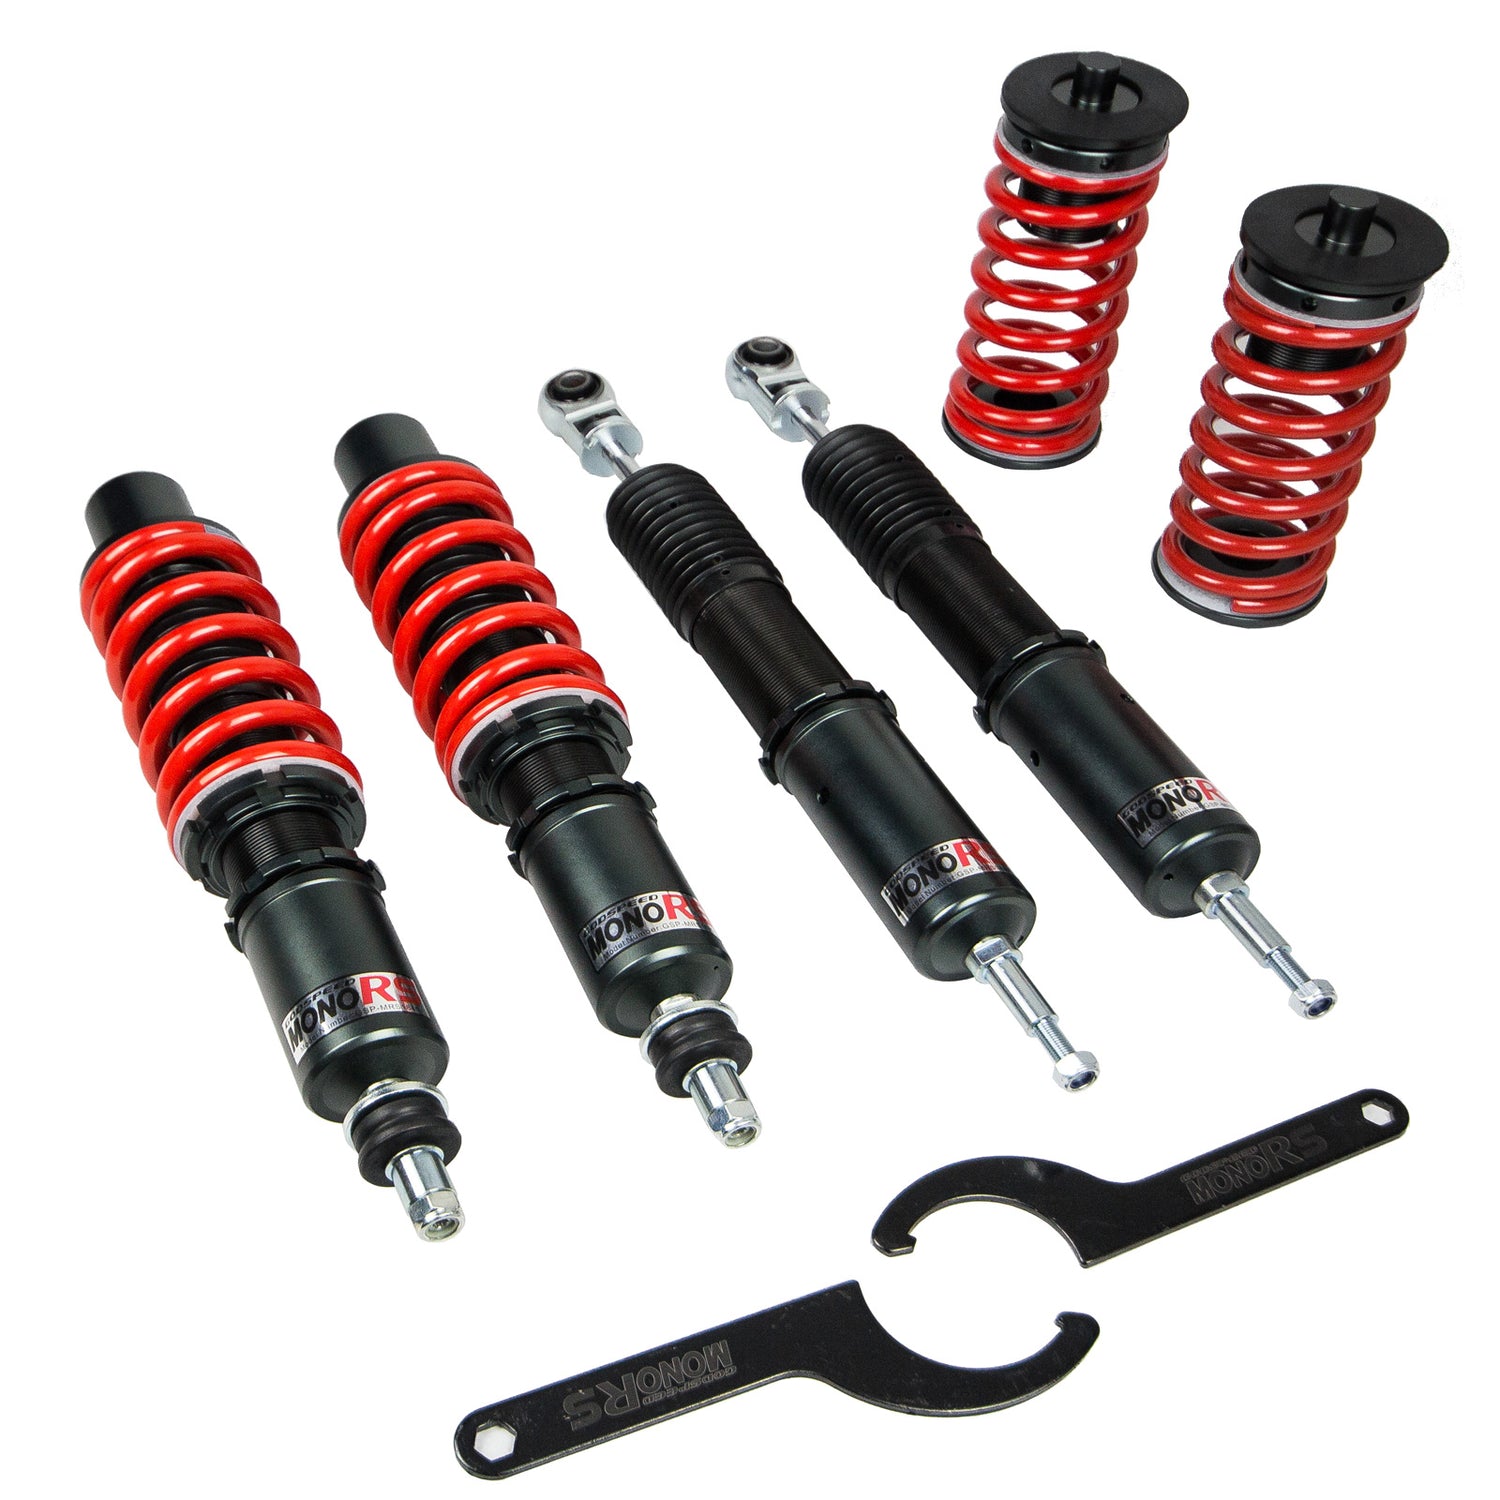 Godspeed MRS1840-B MonoRS Coilover Lowering Kit, 32 Damping Adjustment, Ride Height Adjustable